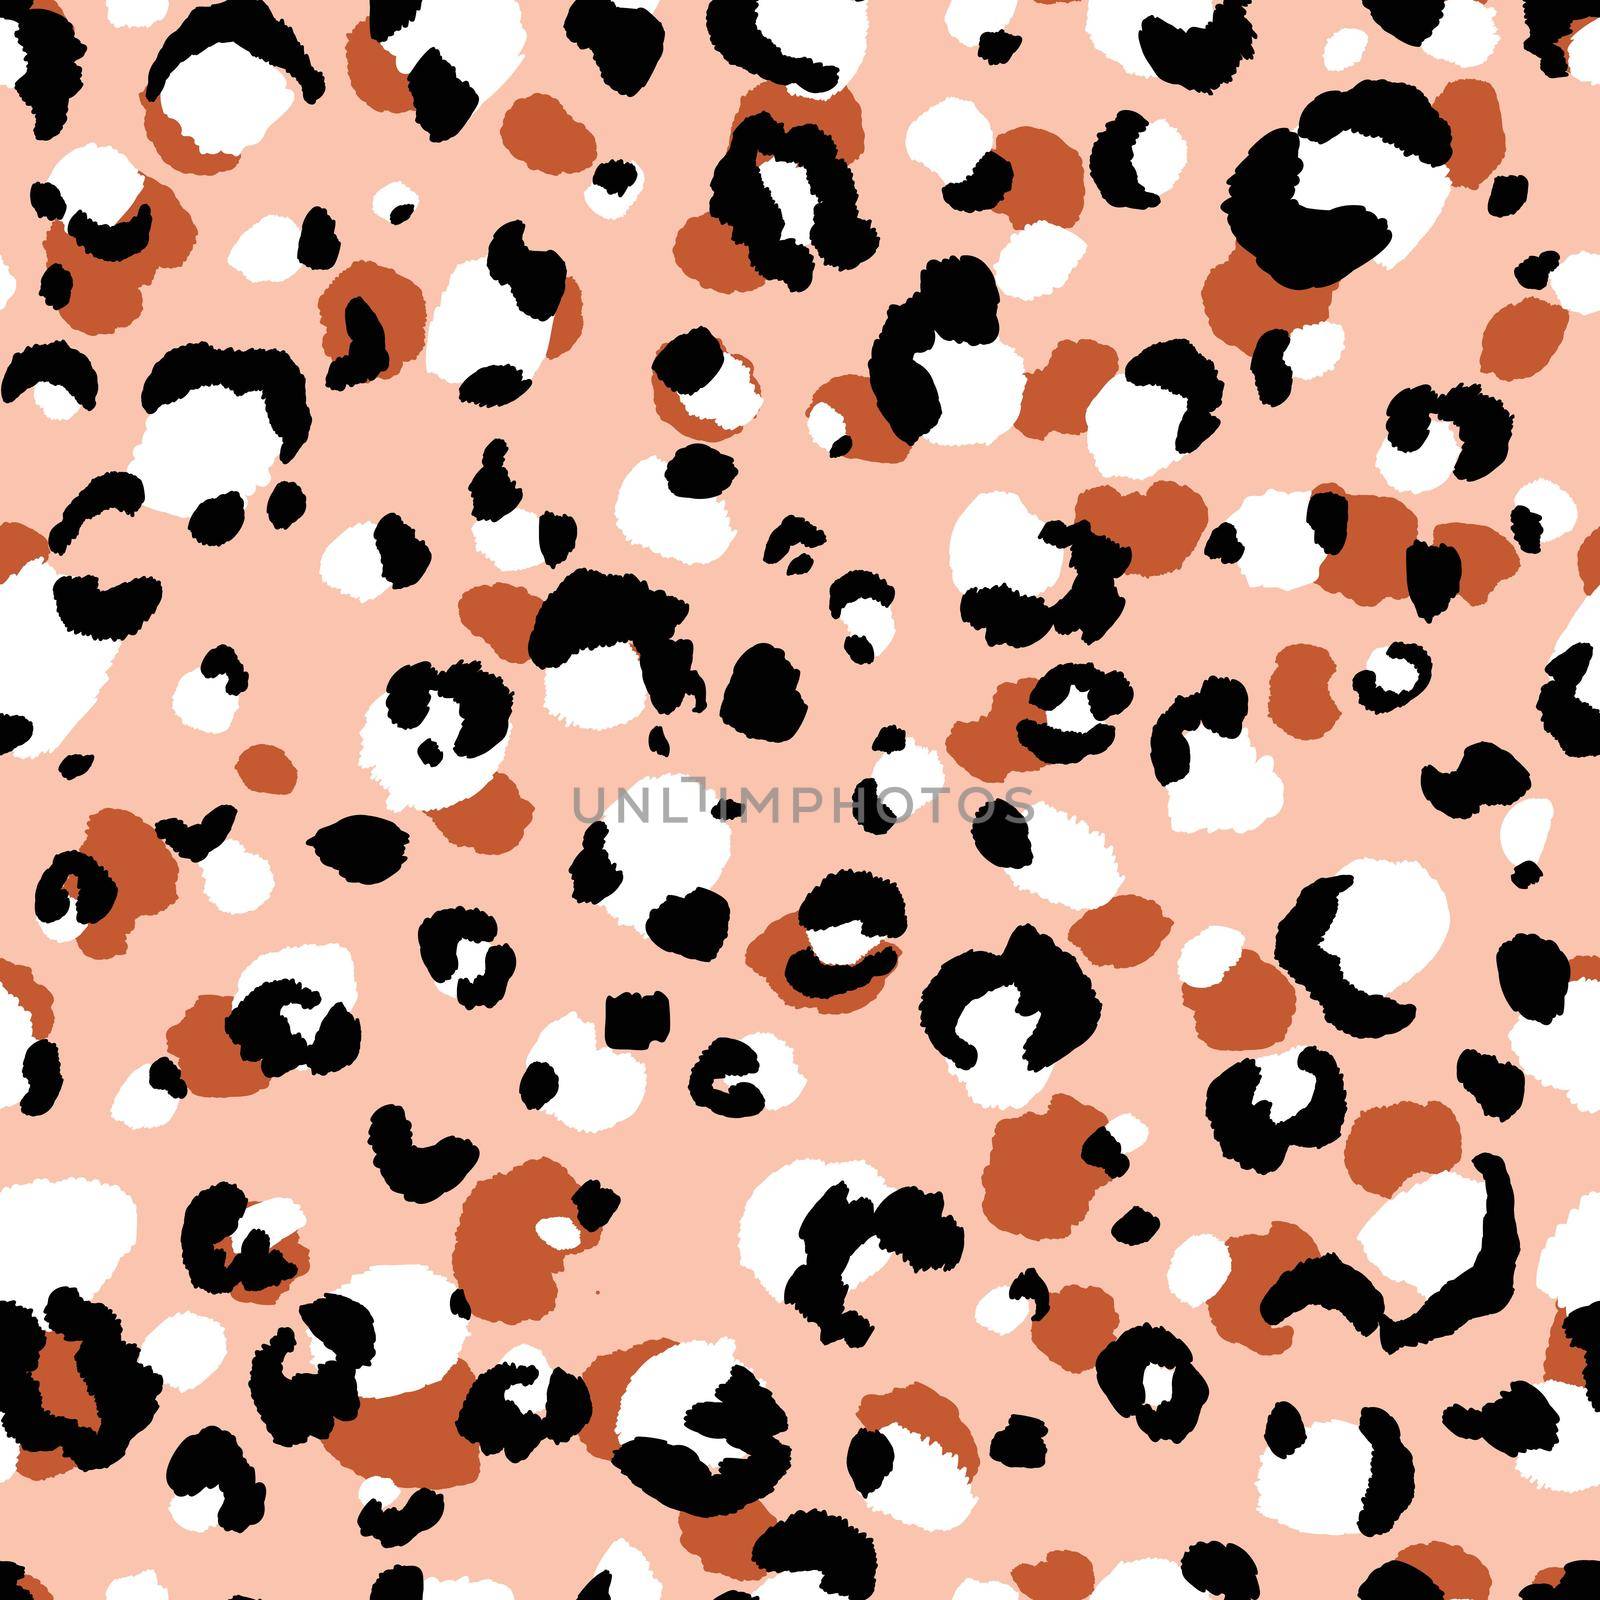 Abstract modern leopard seamless pattern. Animals trendy background. Beige and black decorative vector stock illustration for print, card, postcard, fabric, textile. Modern ornament of stylized skin. by allaku